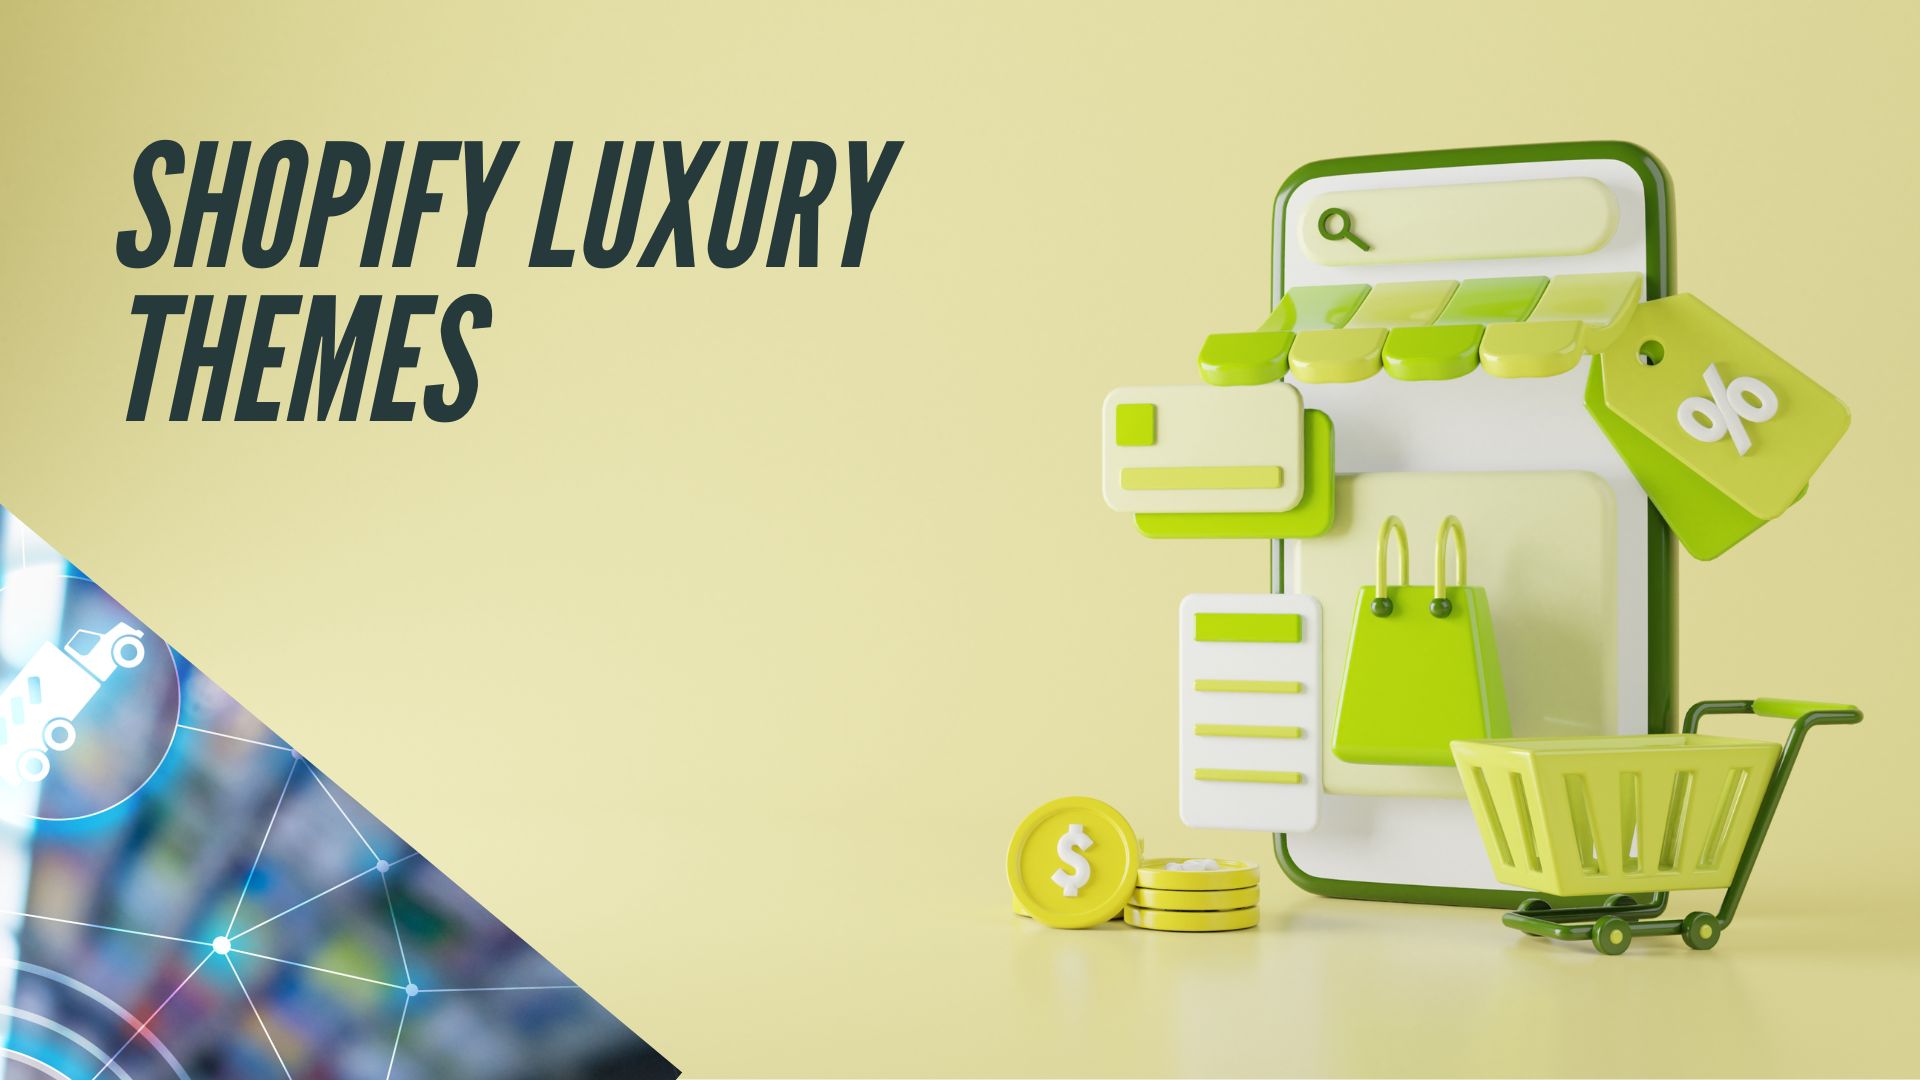 Shopify Luxury Themes